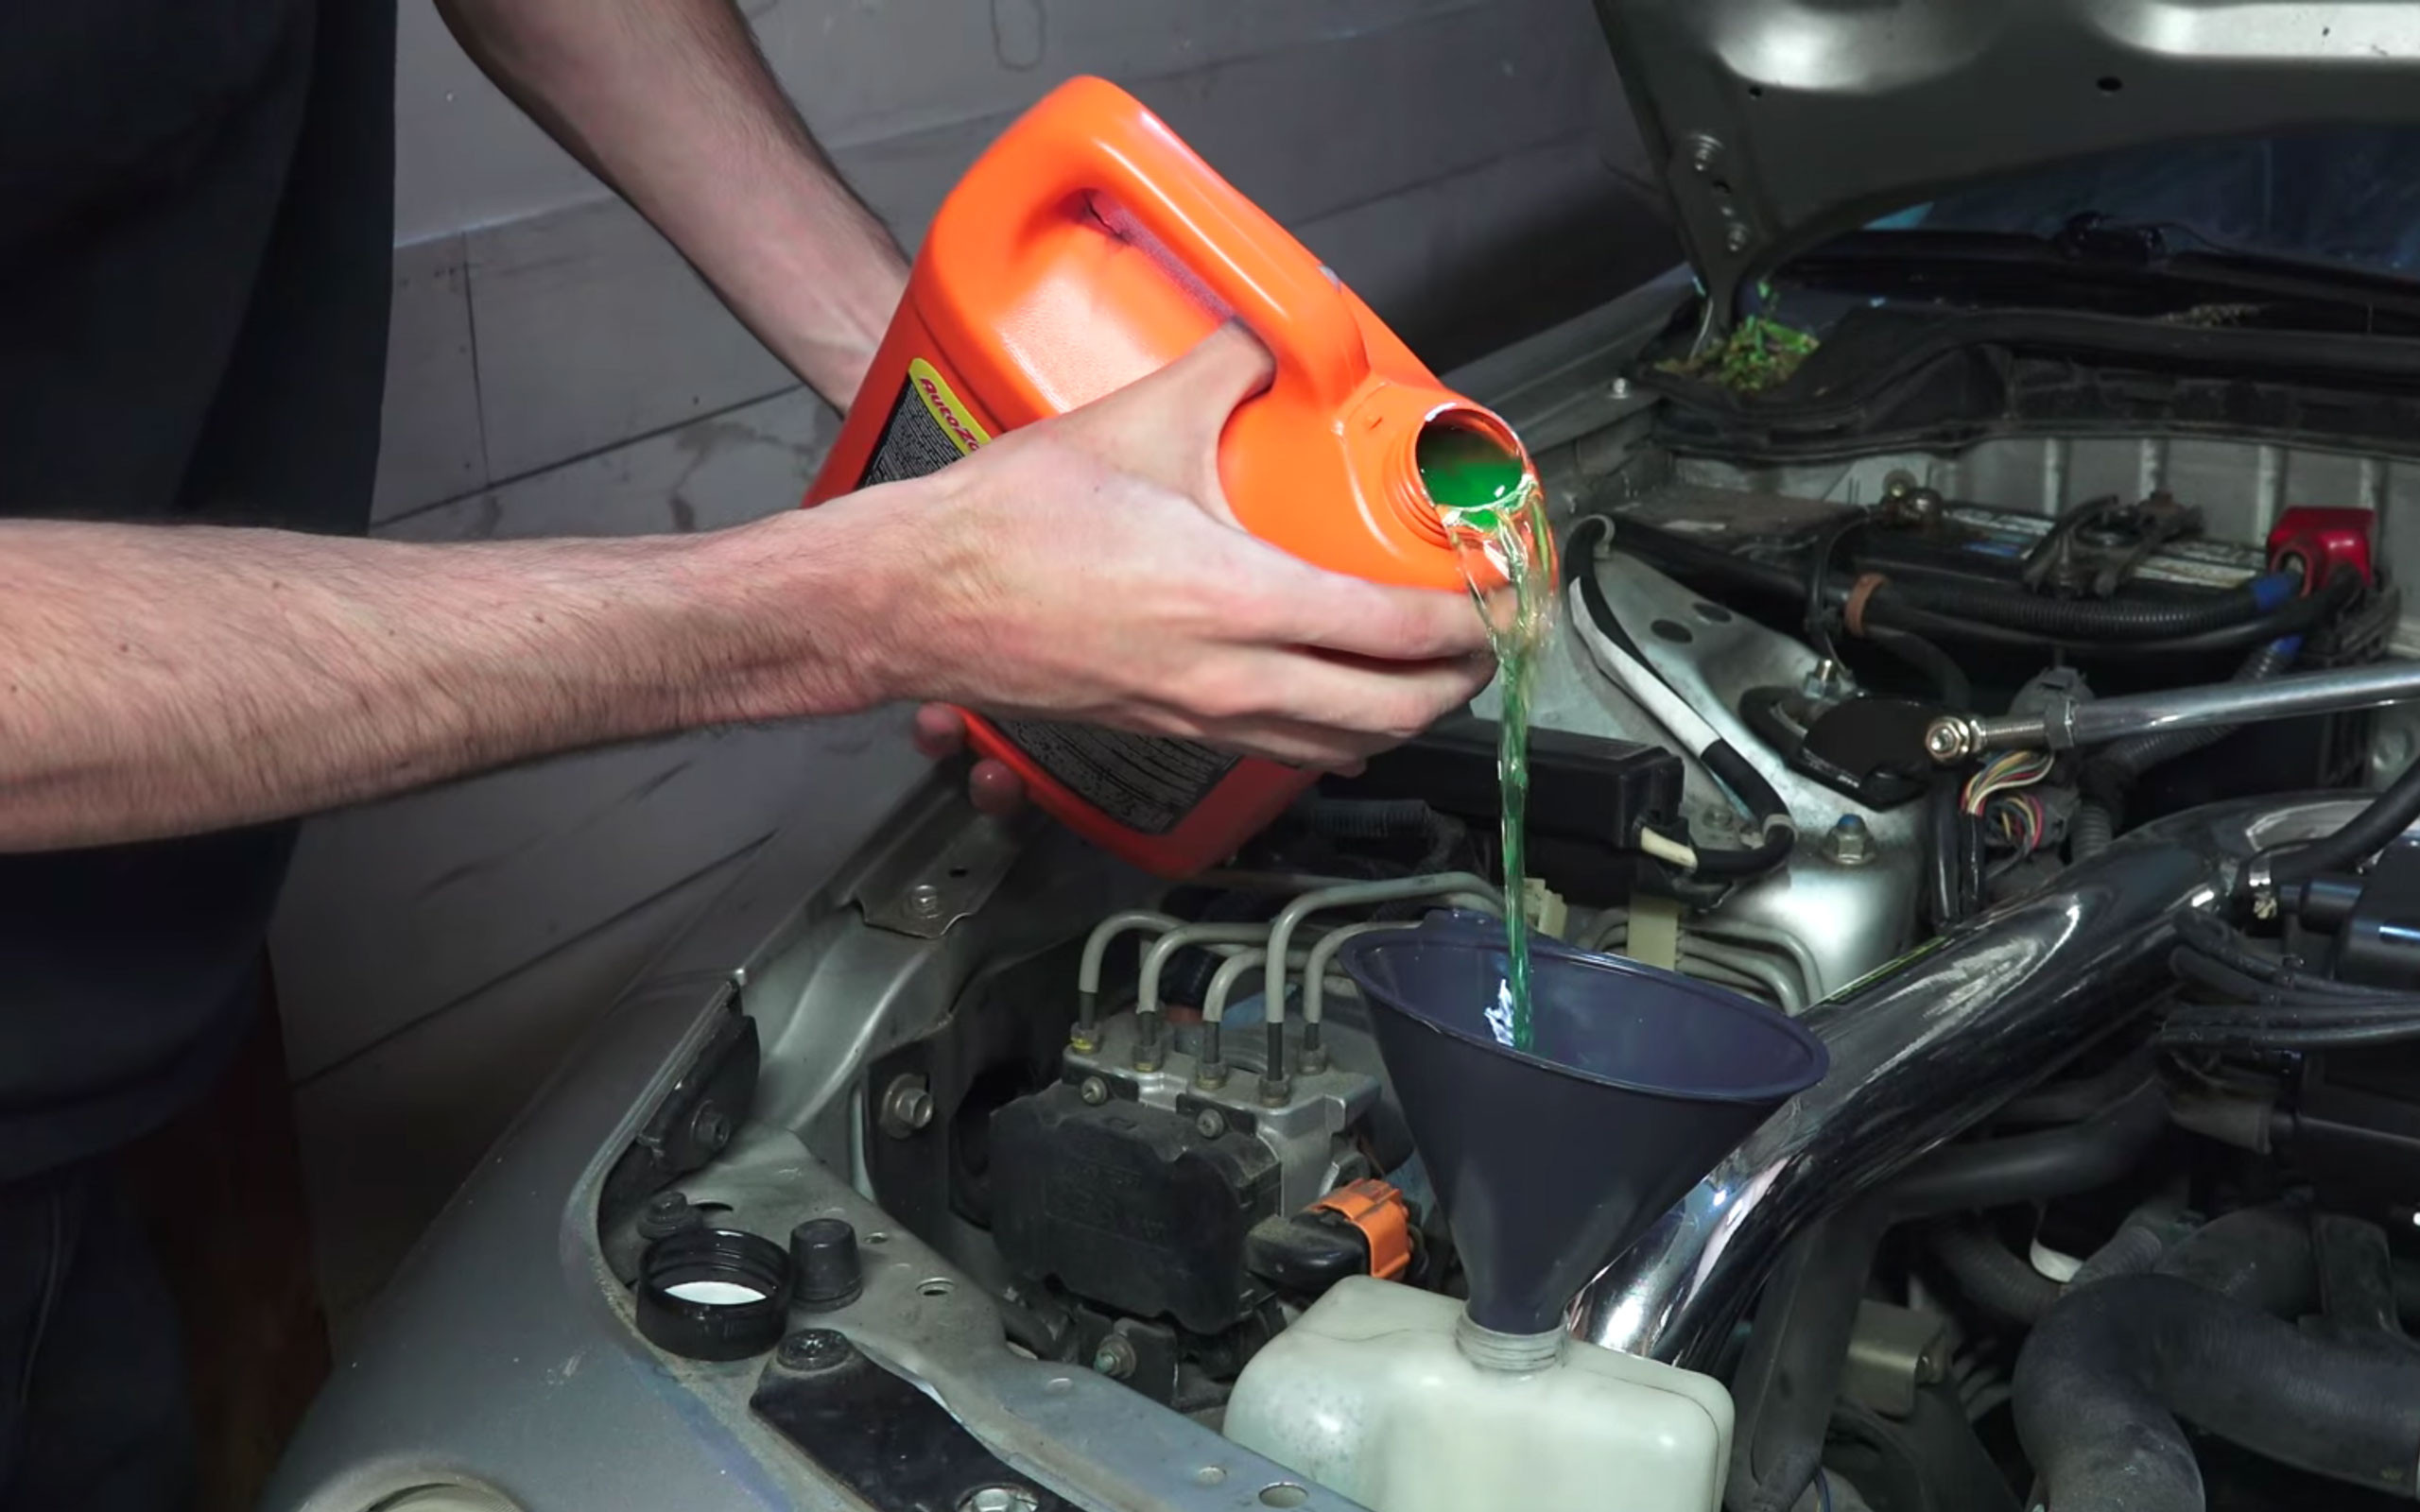 Кадр видео &ldquo;How To Change The Coolant In Your Car&rdquo;. Скриншот &copy; L!FE